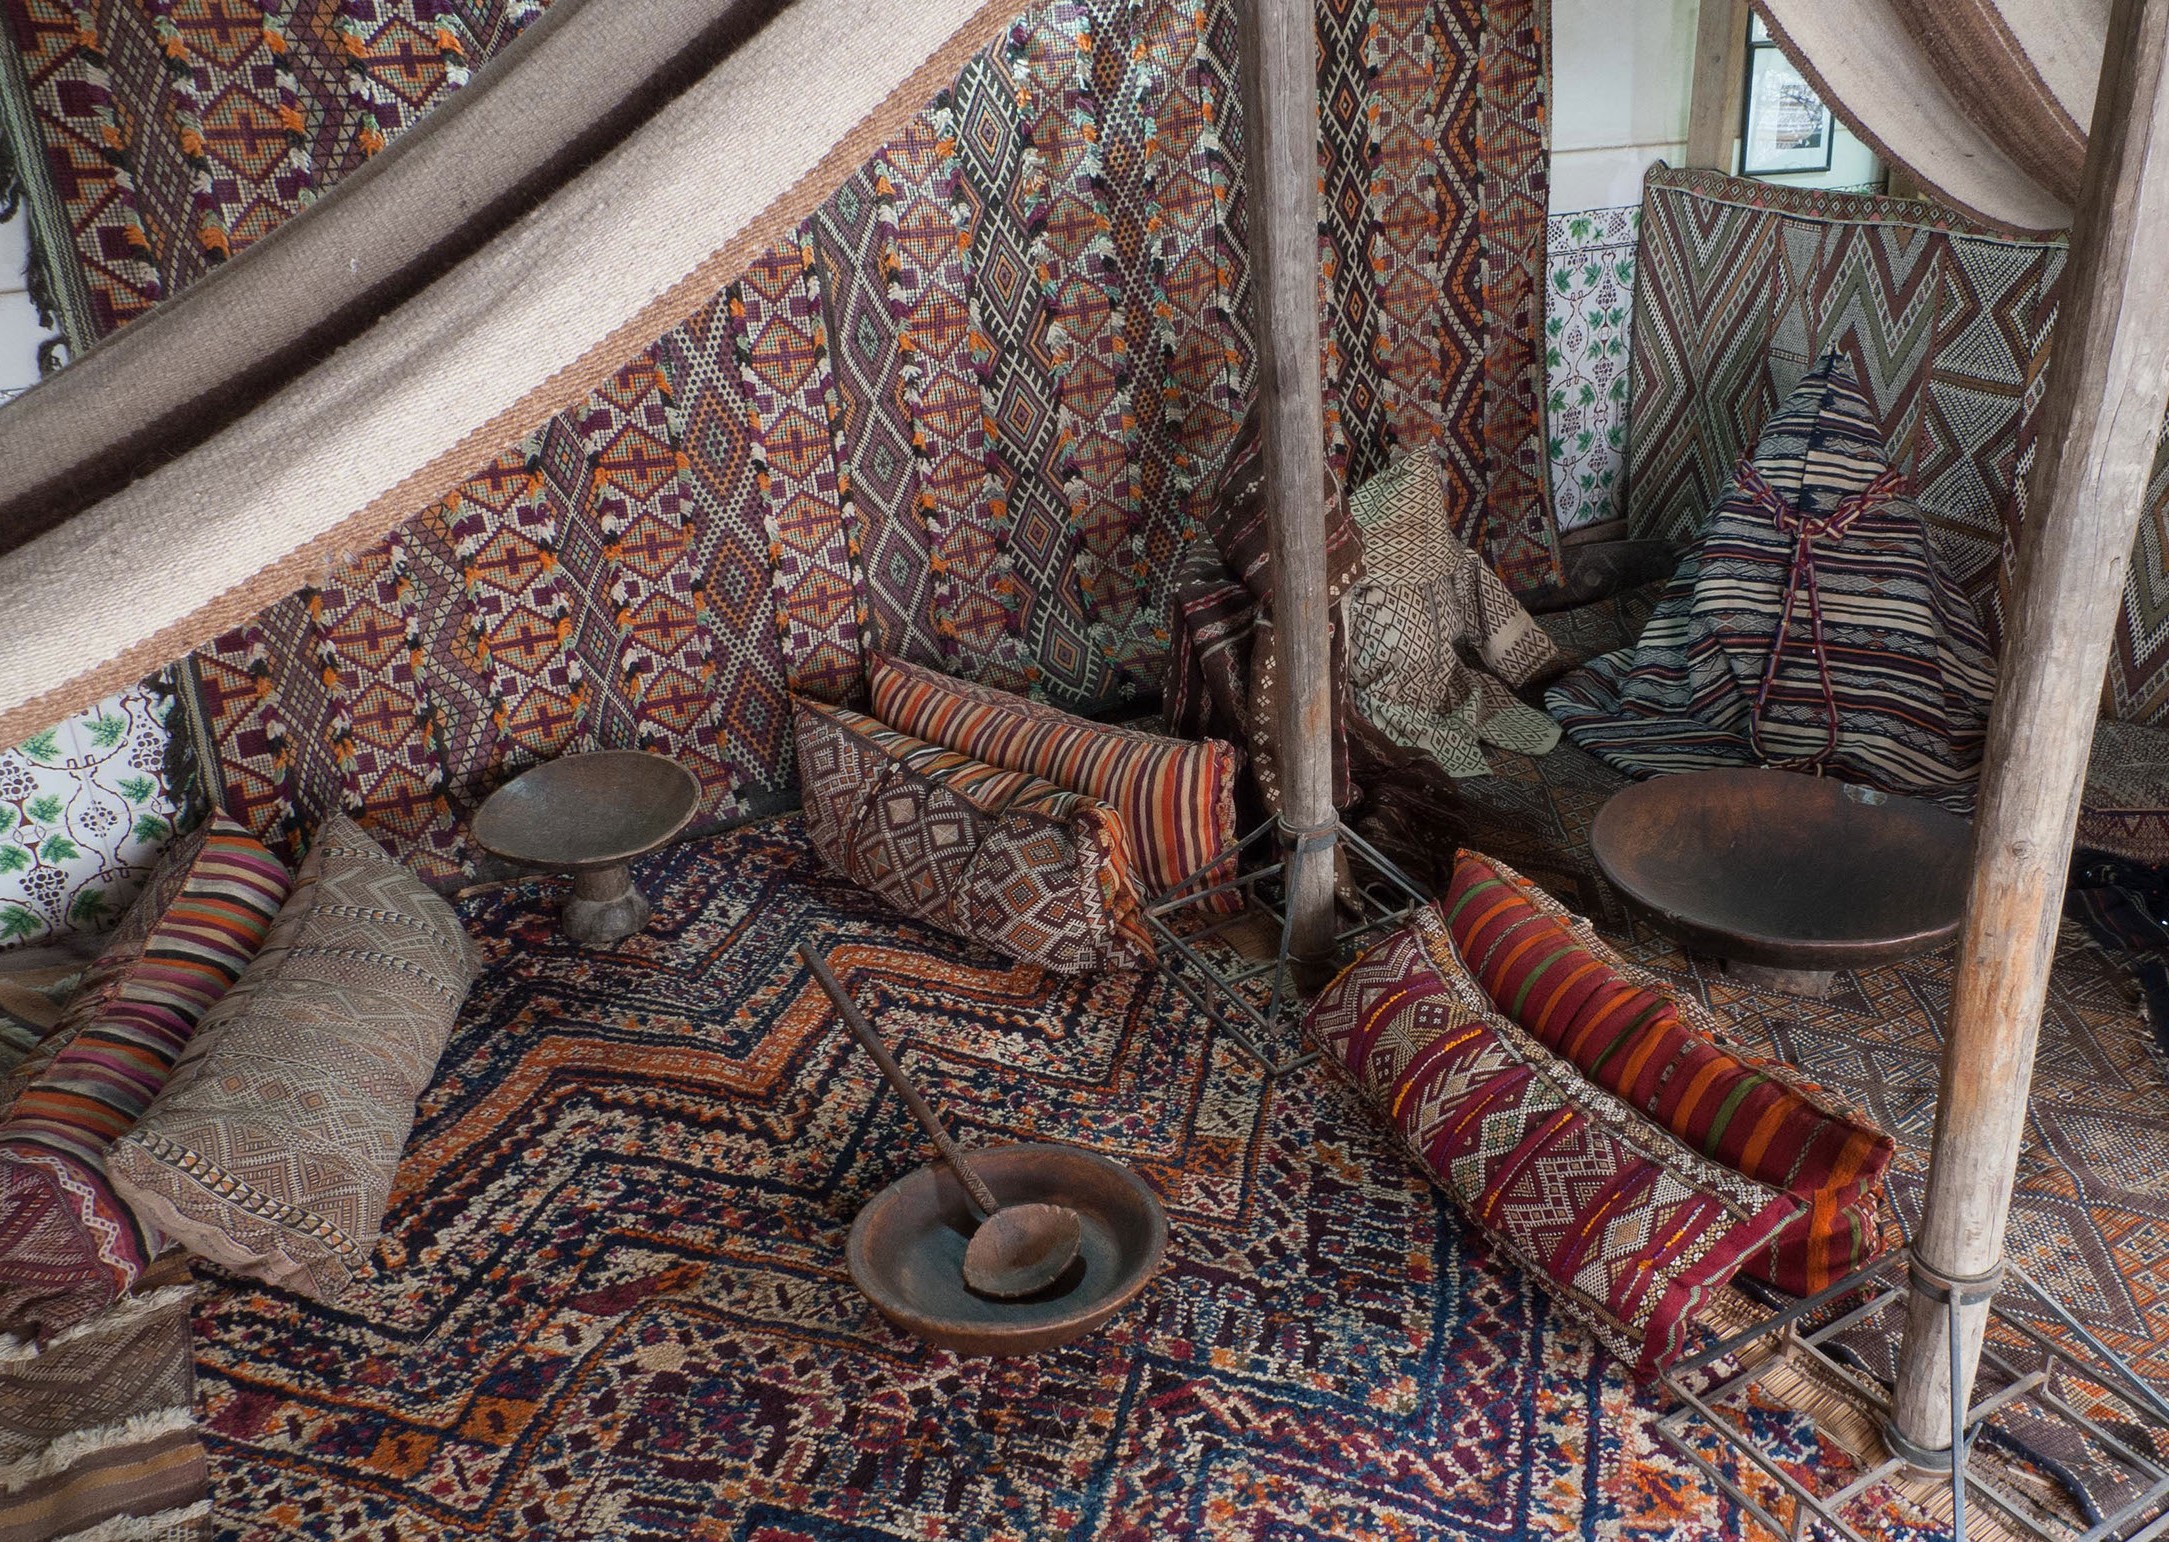 maison tiskiwin is a private museum in marrakech